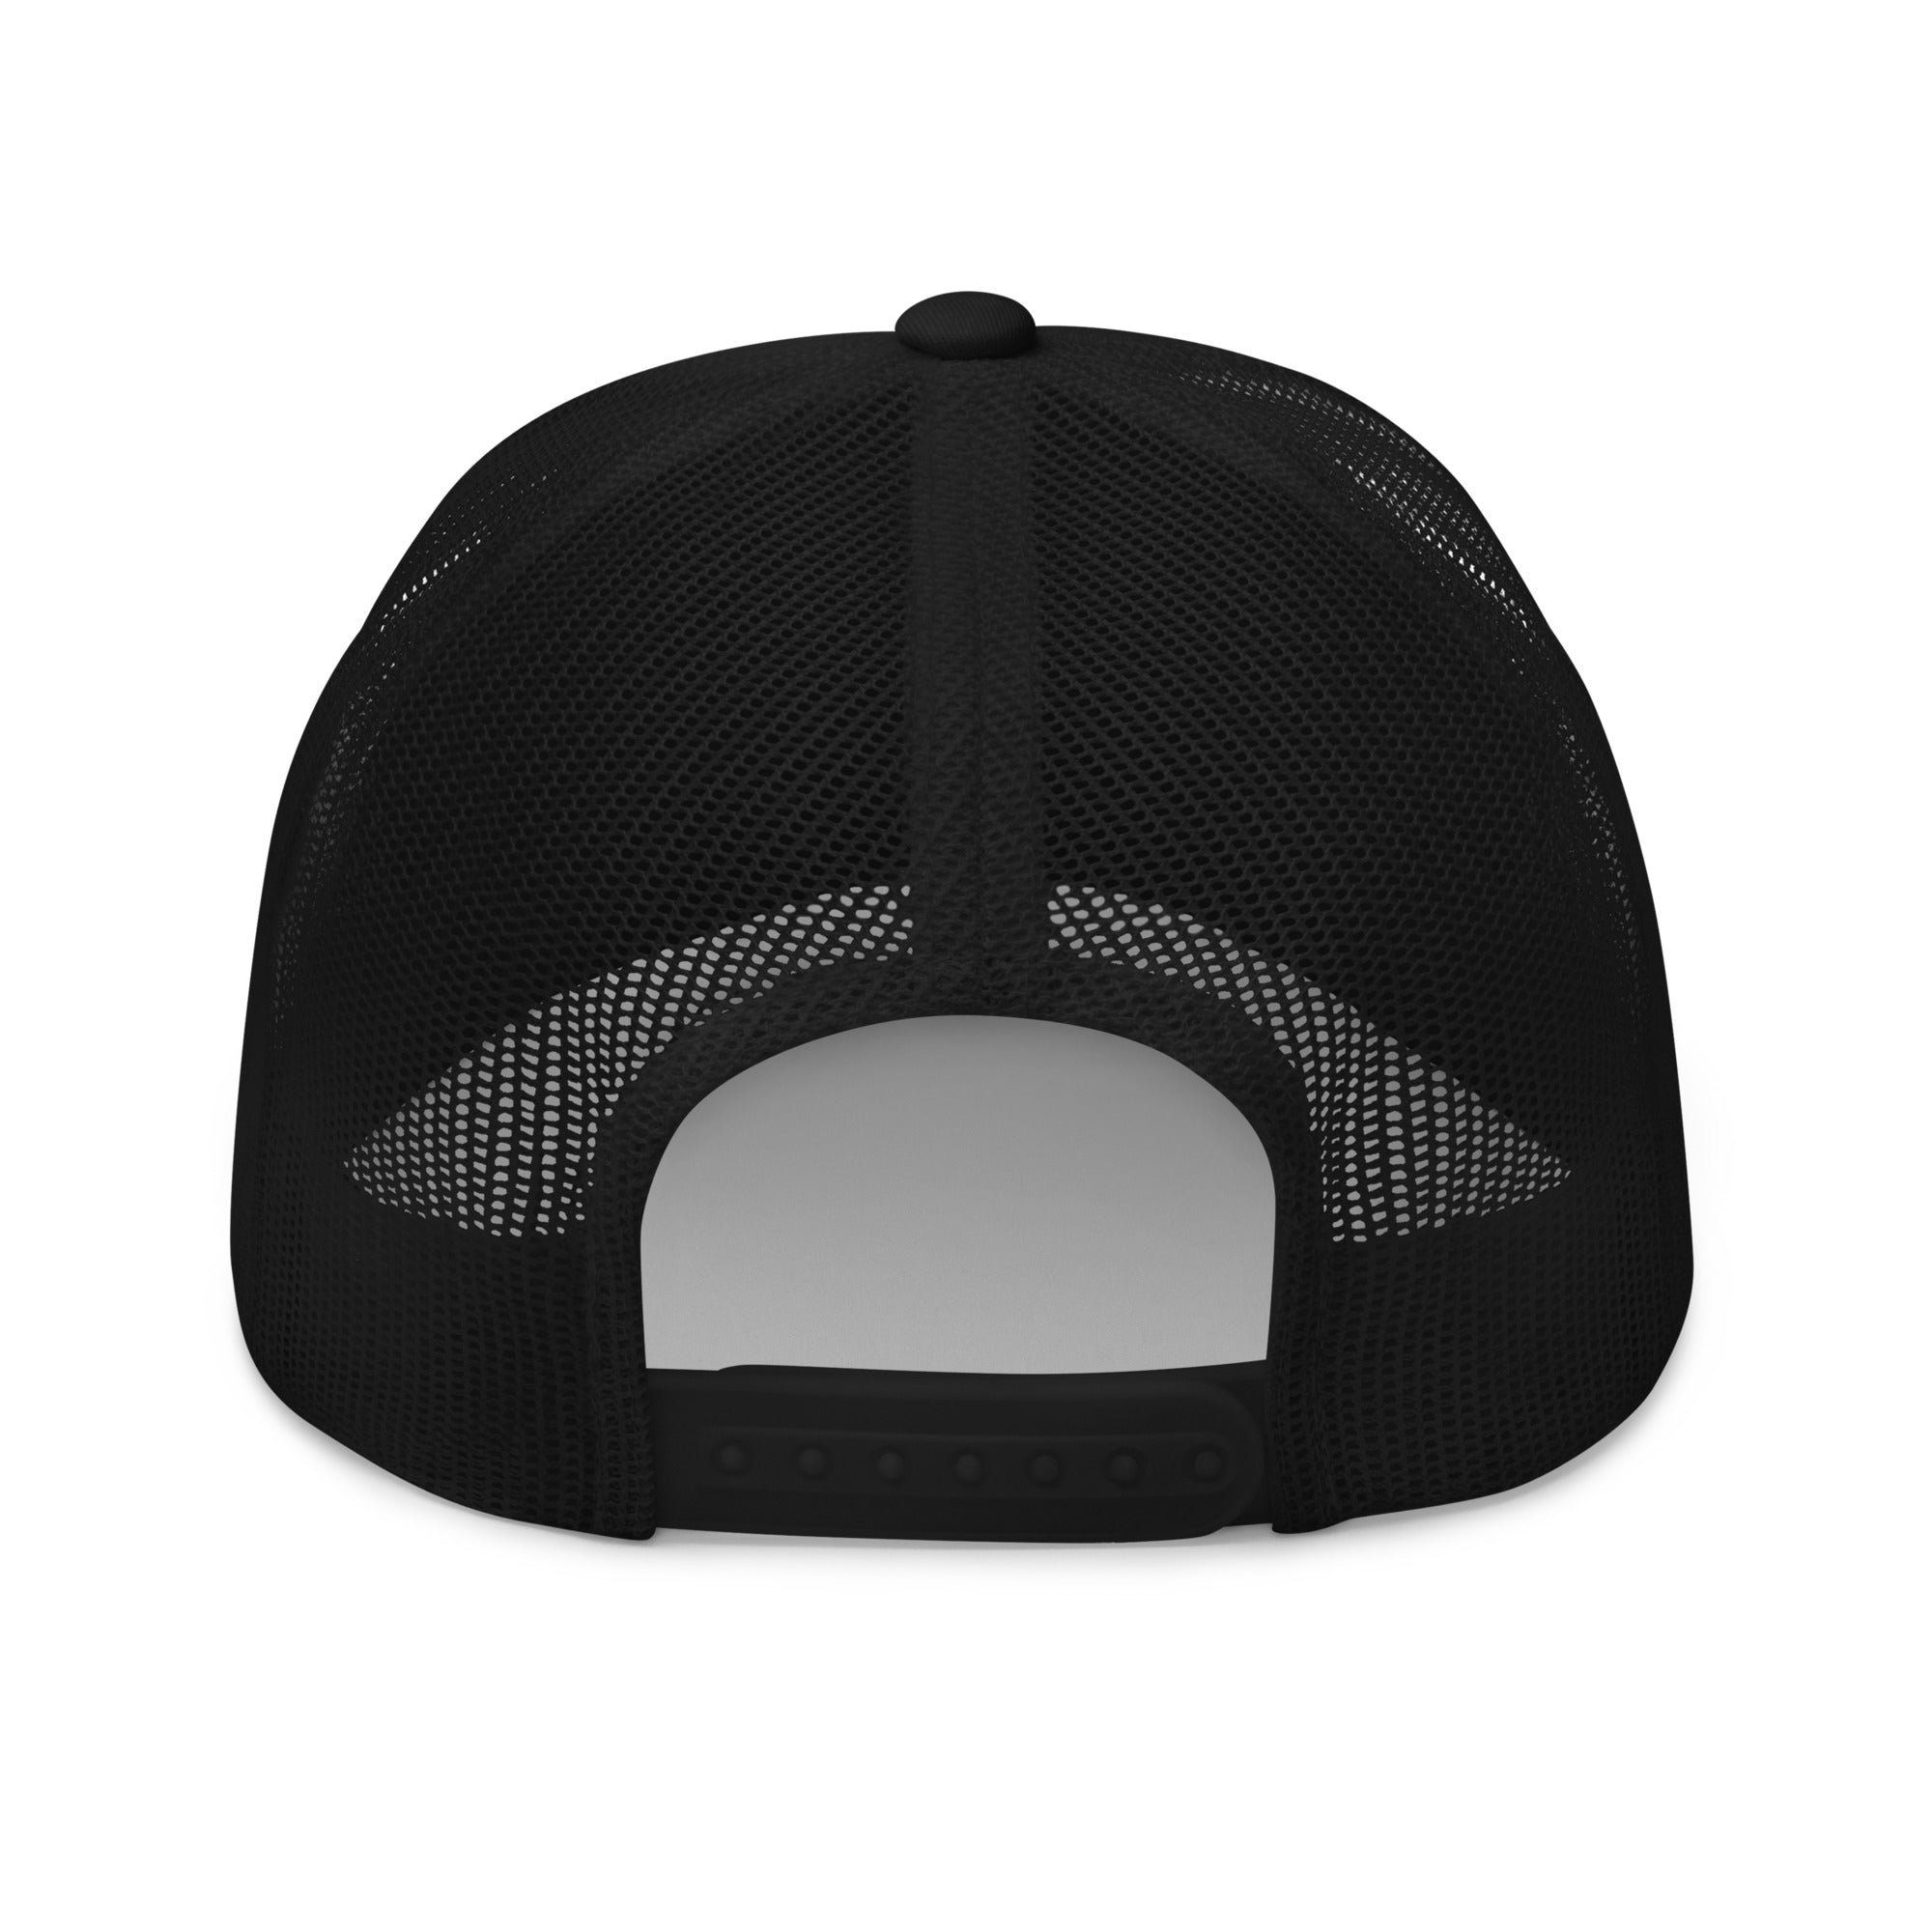 Bitcoin Headwear - The Stack Sats Trucker Hat has mesh back panels and a snapback closure. Back view.